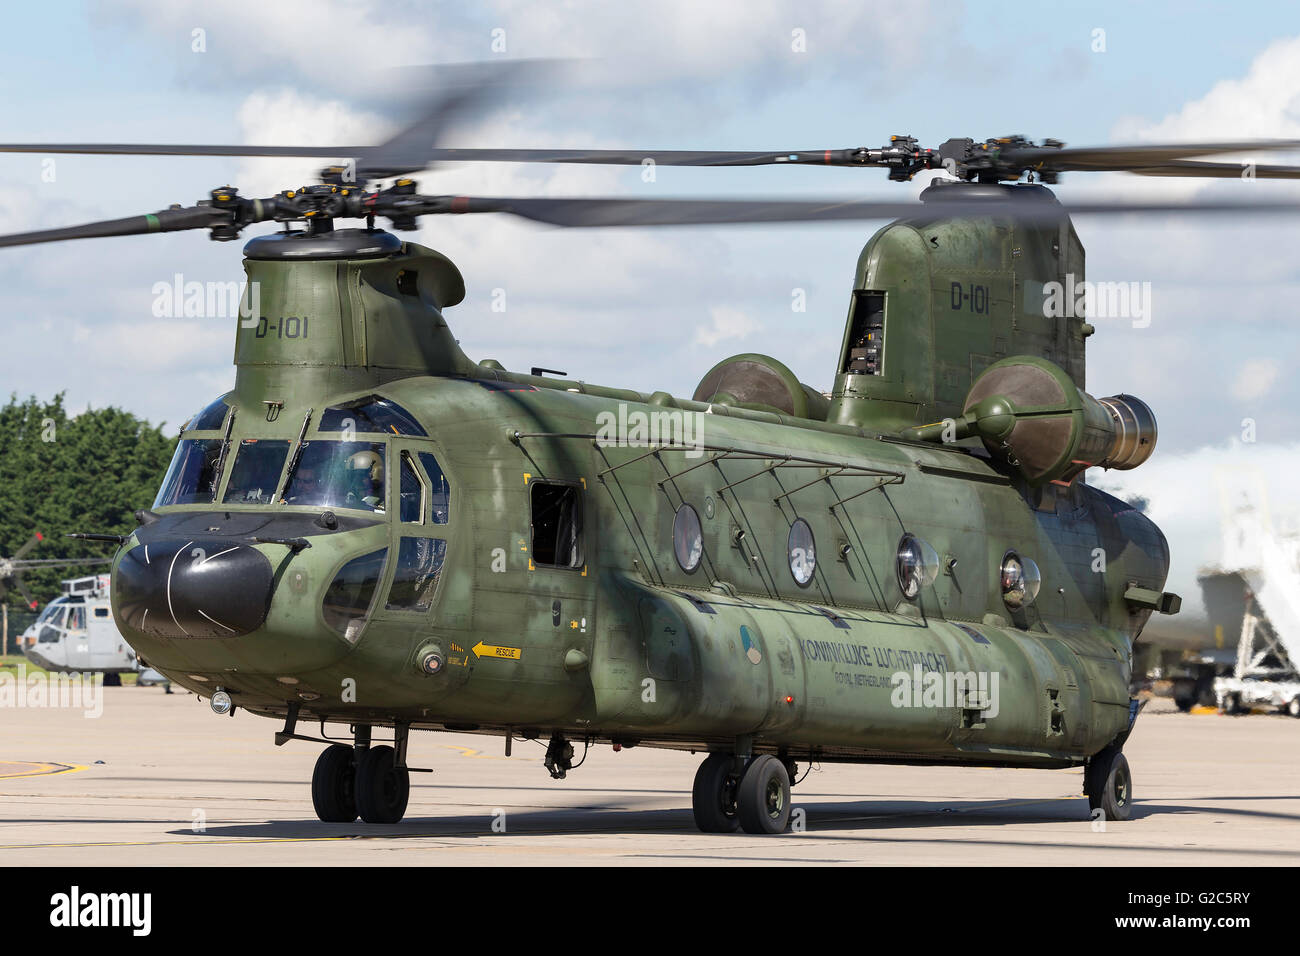 Royal Netherlands Air Force Boeing CH-47D Chinook Military transport Helicopter D-101 from 298 Squadron based at Gilze Rijen. Stock Photo